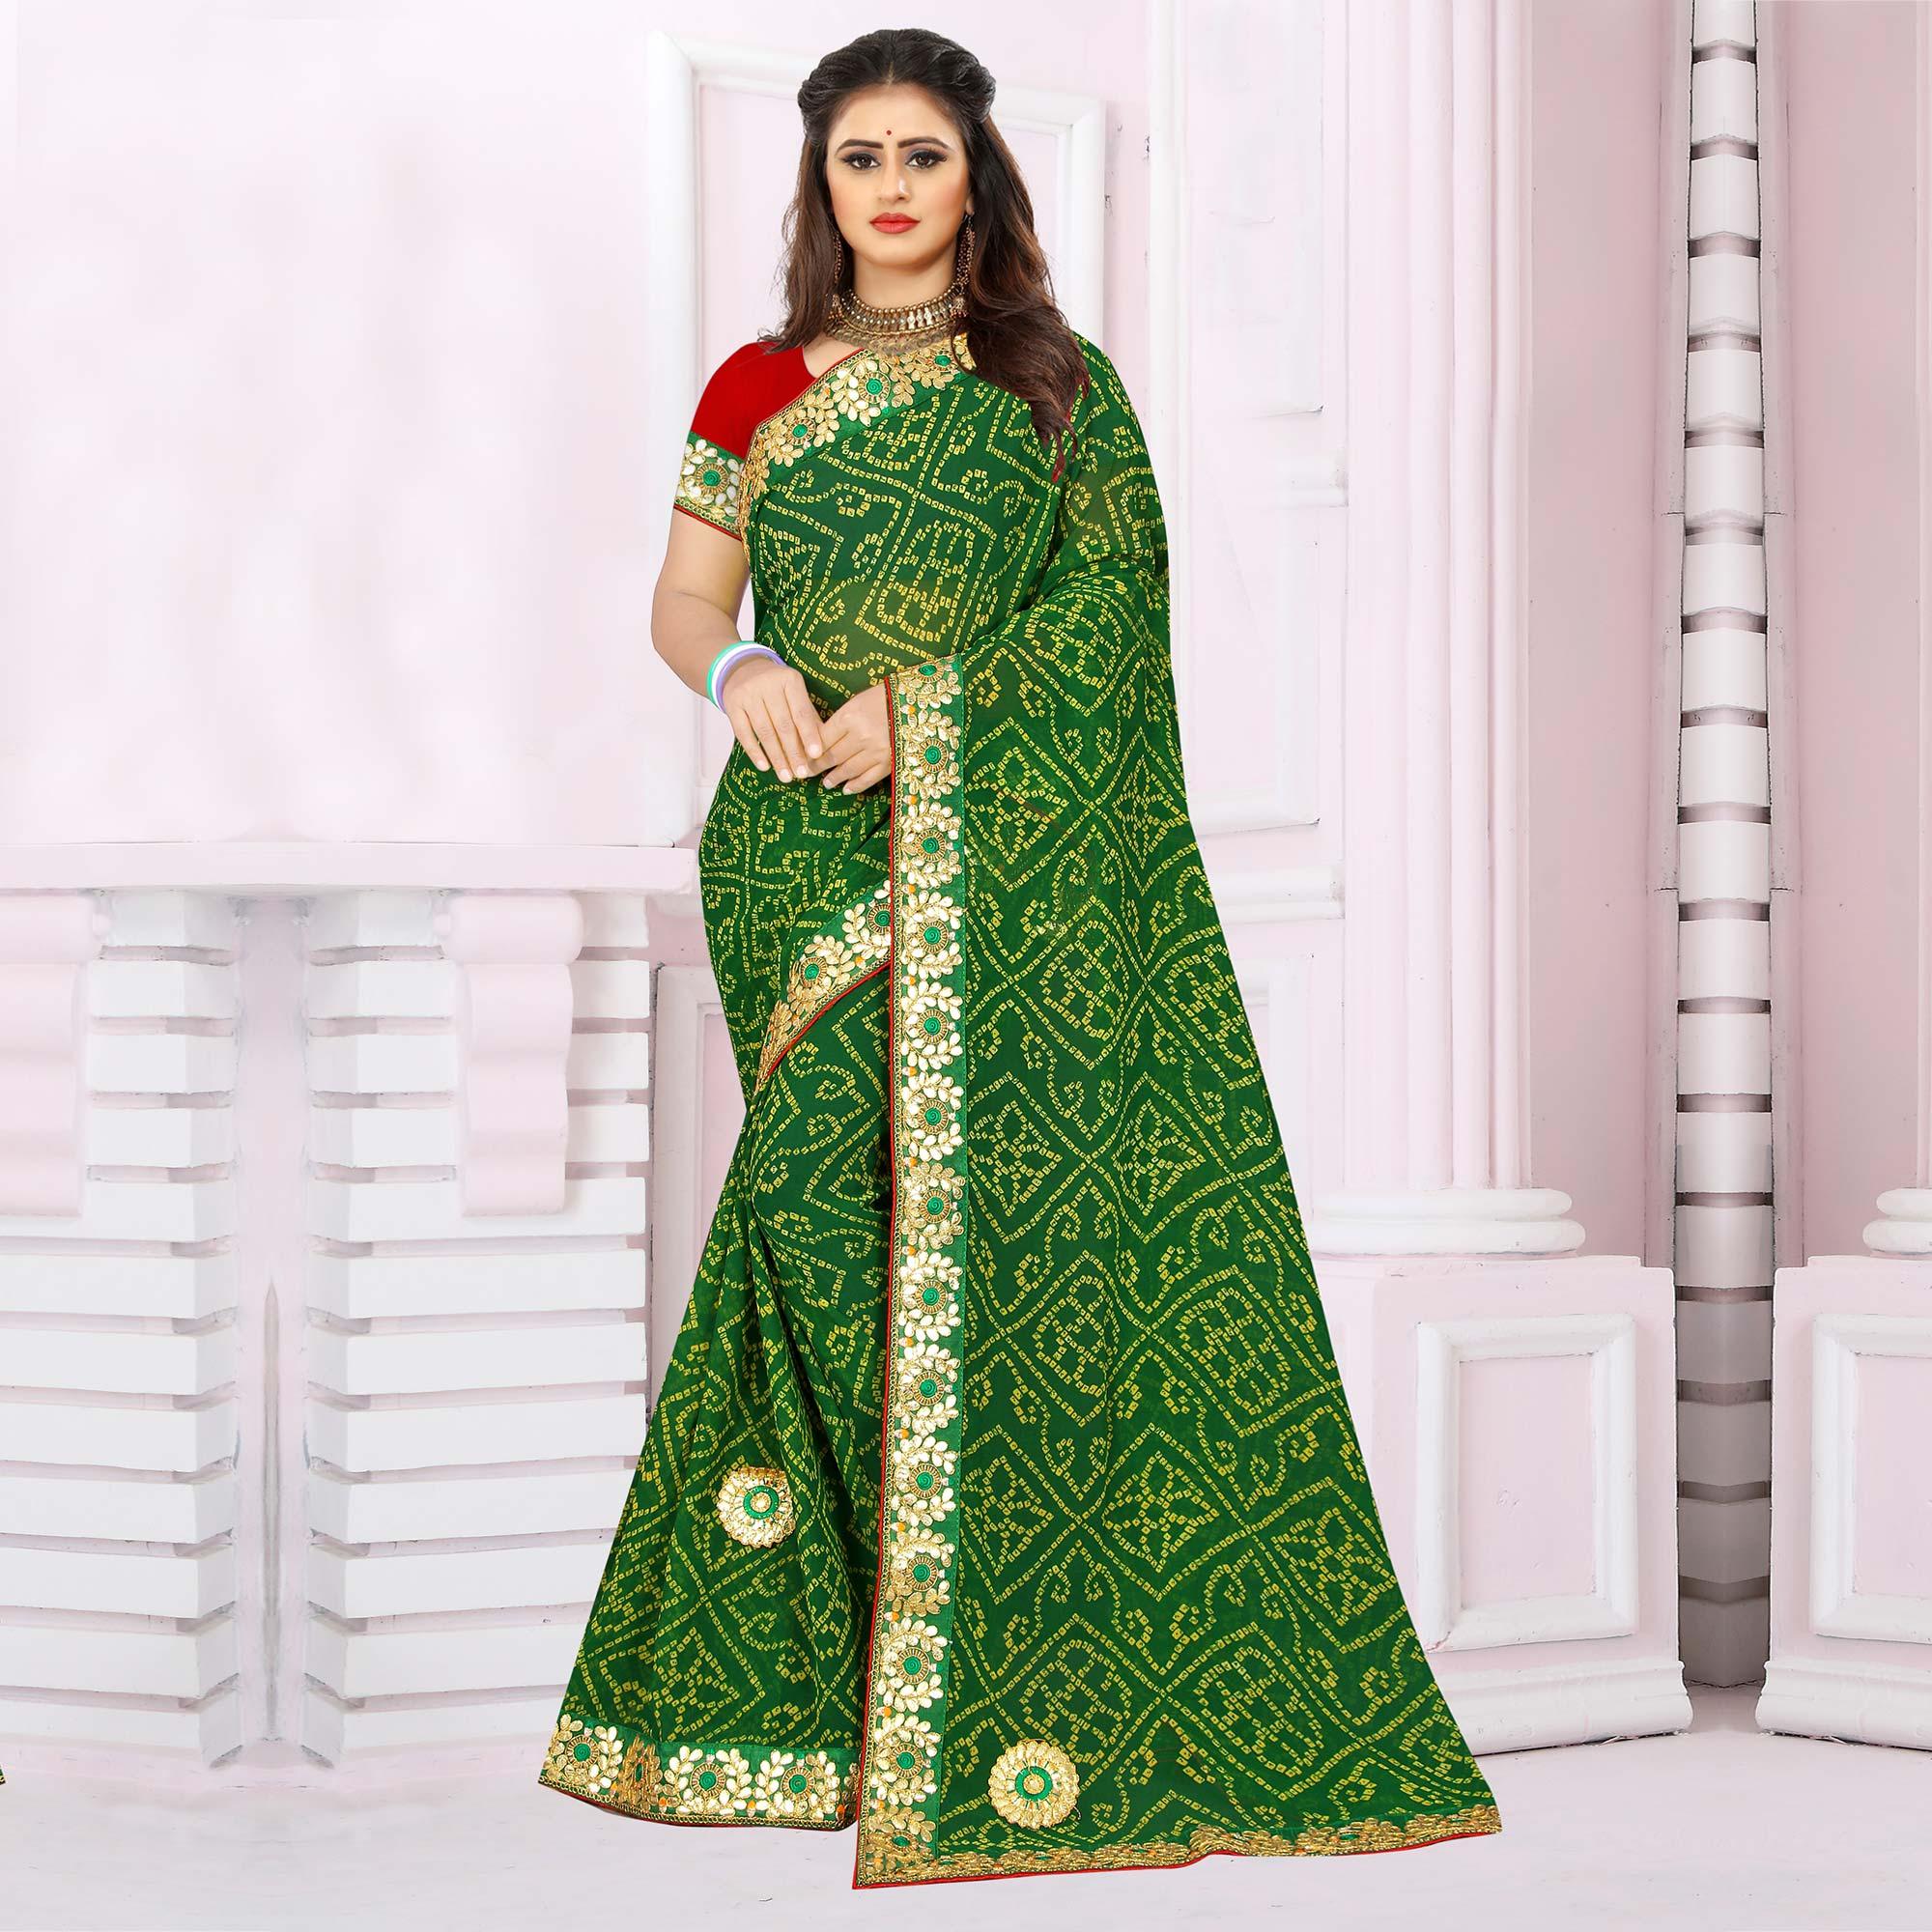 Engrossing Green Coloured Casual Wear Printed Georgette Saree - Peachmode